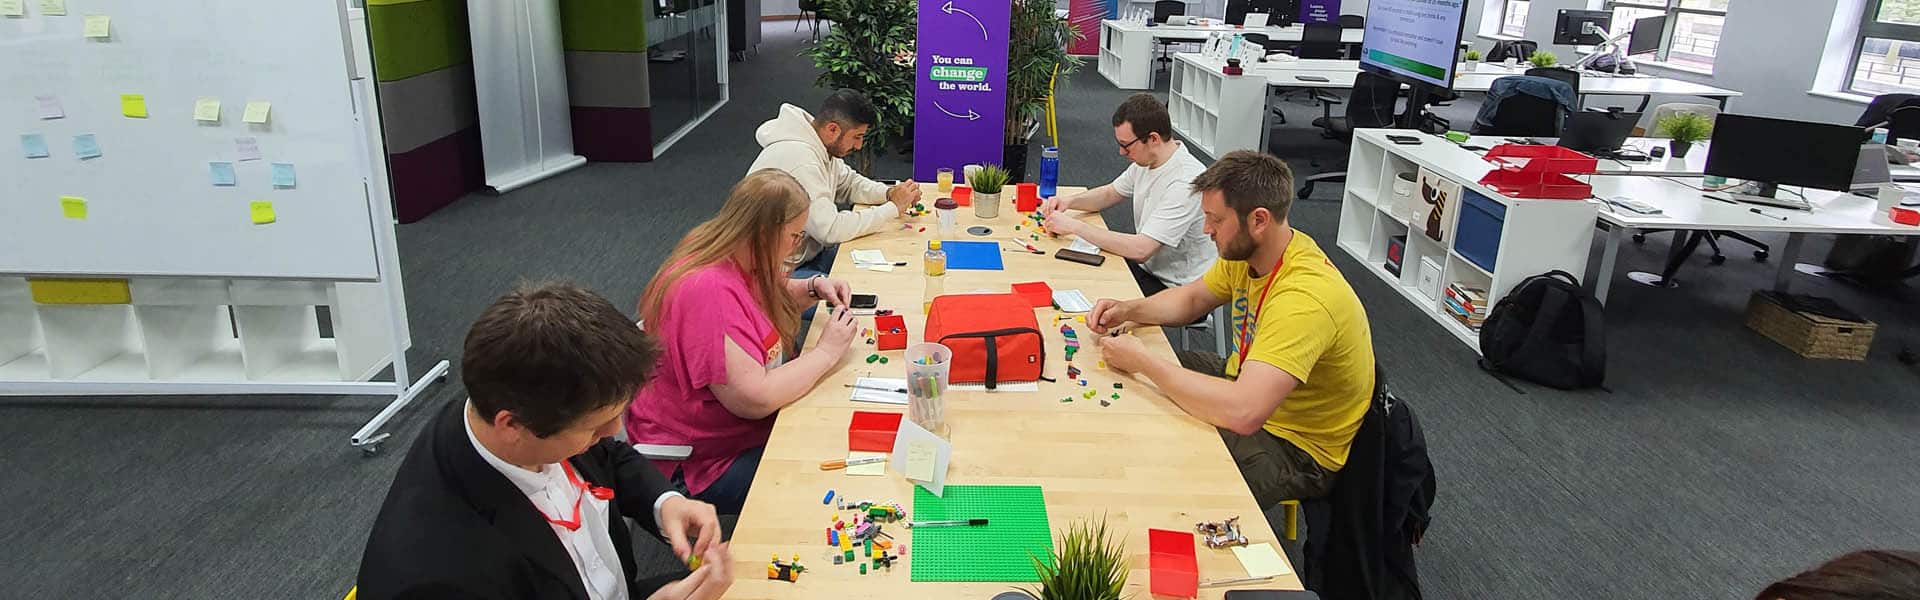 People surround a table as a facilitator shows a concept with Lego serious play